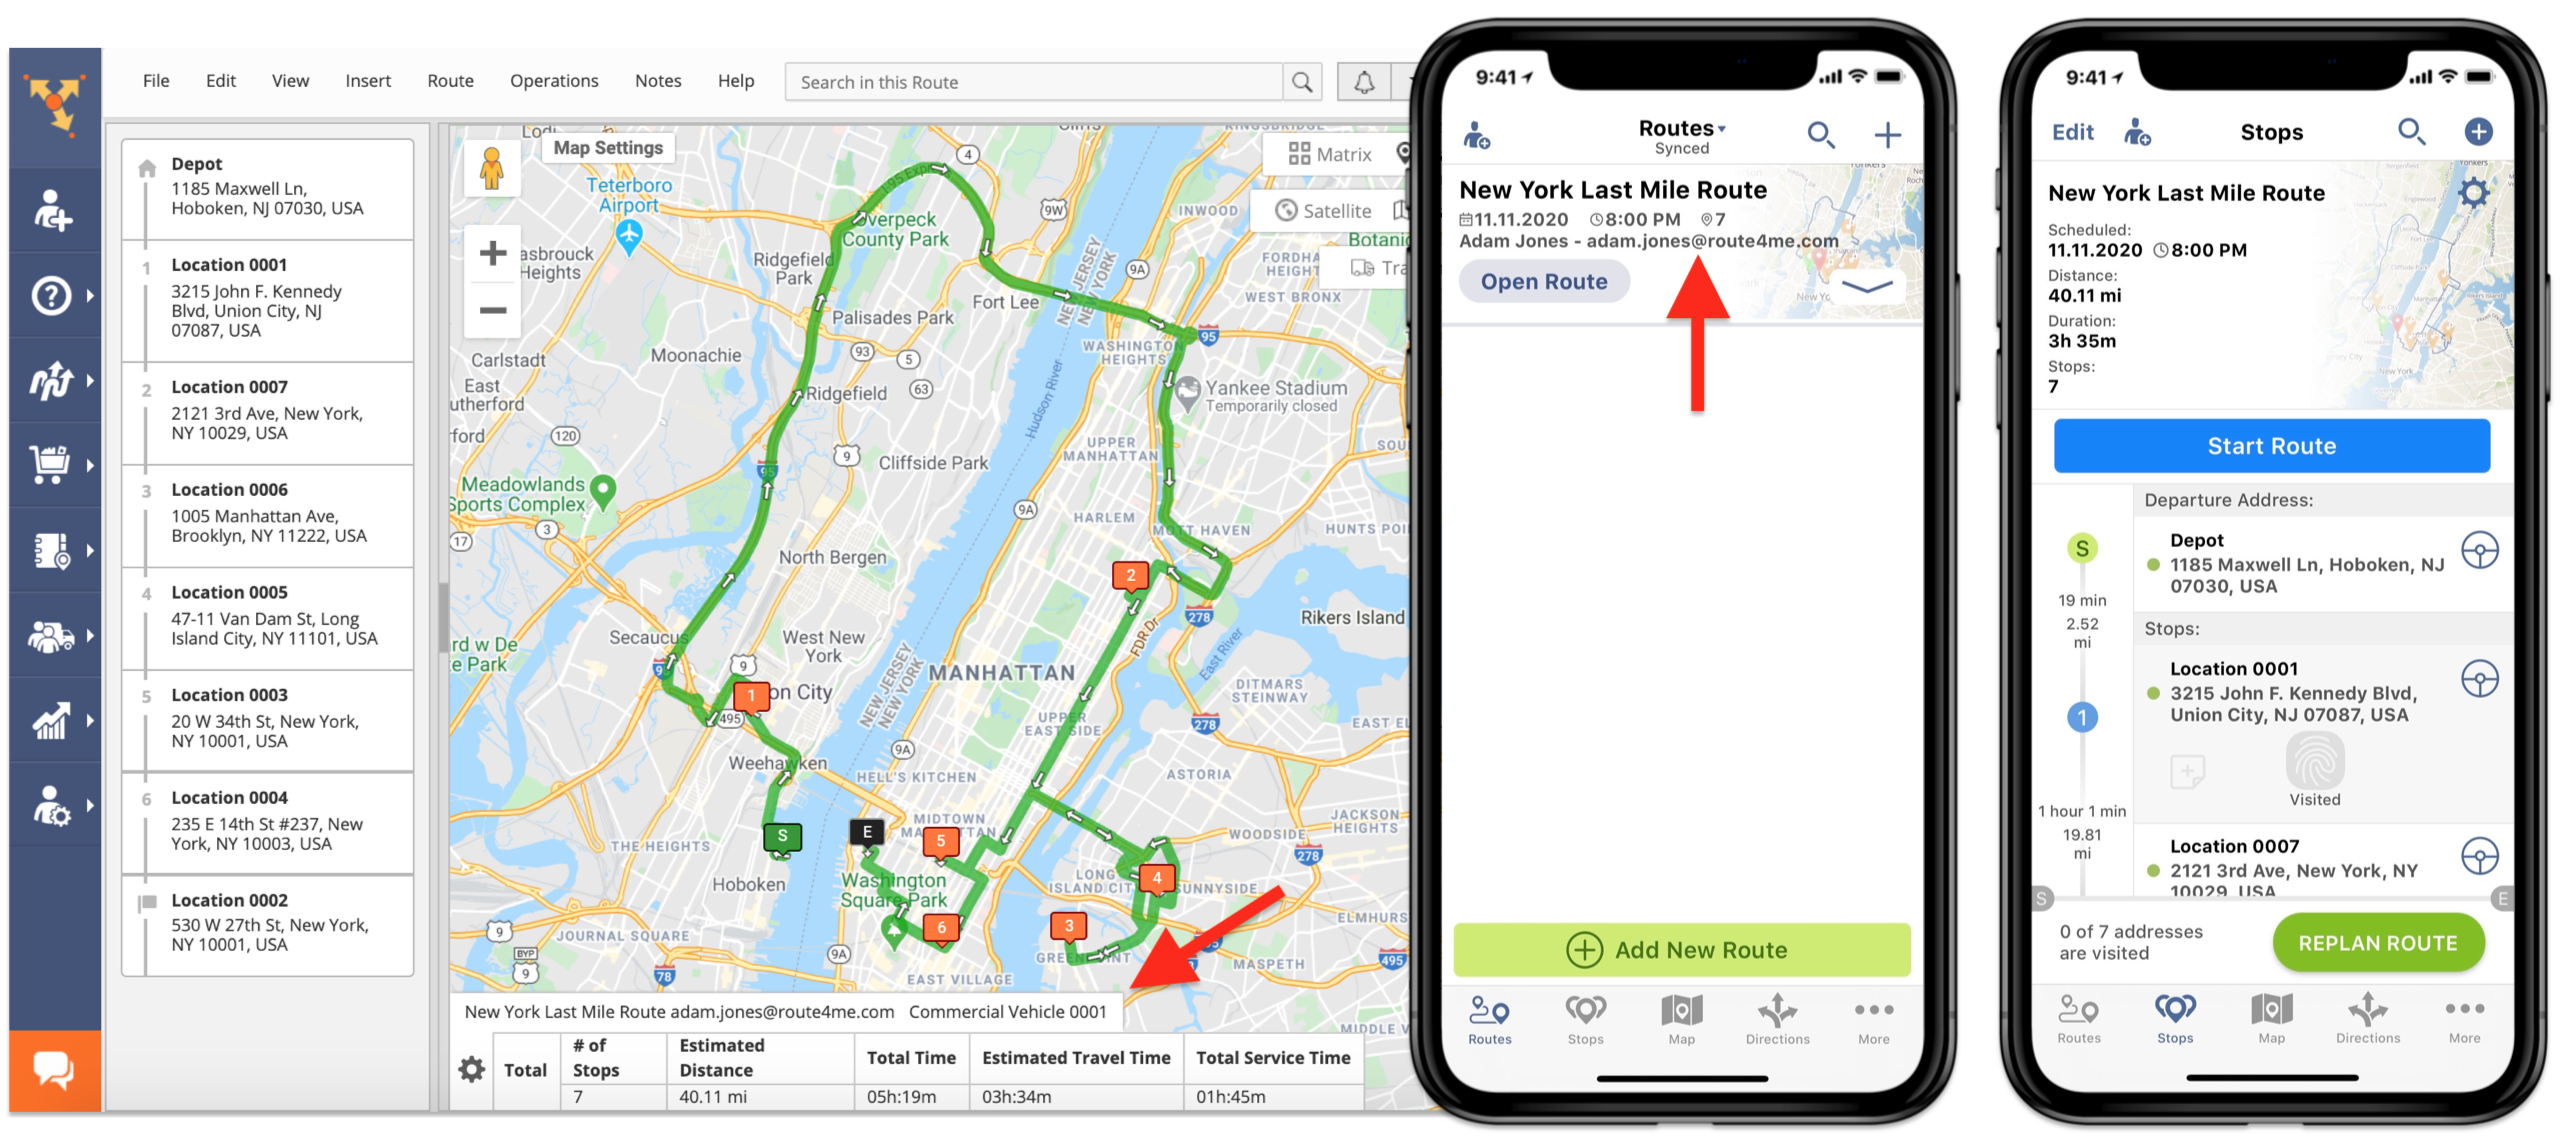 Assign the route to the driver to dispatch the commercial route to the driver's iOS device.